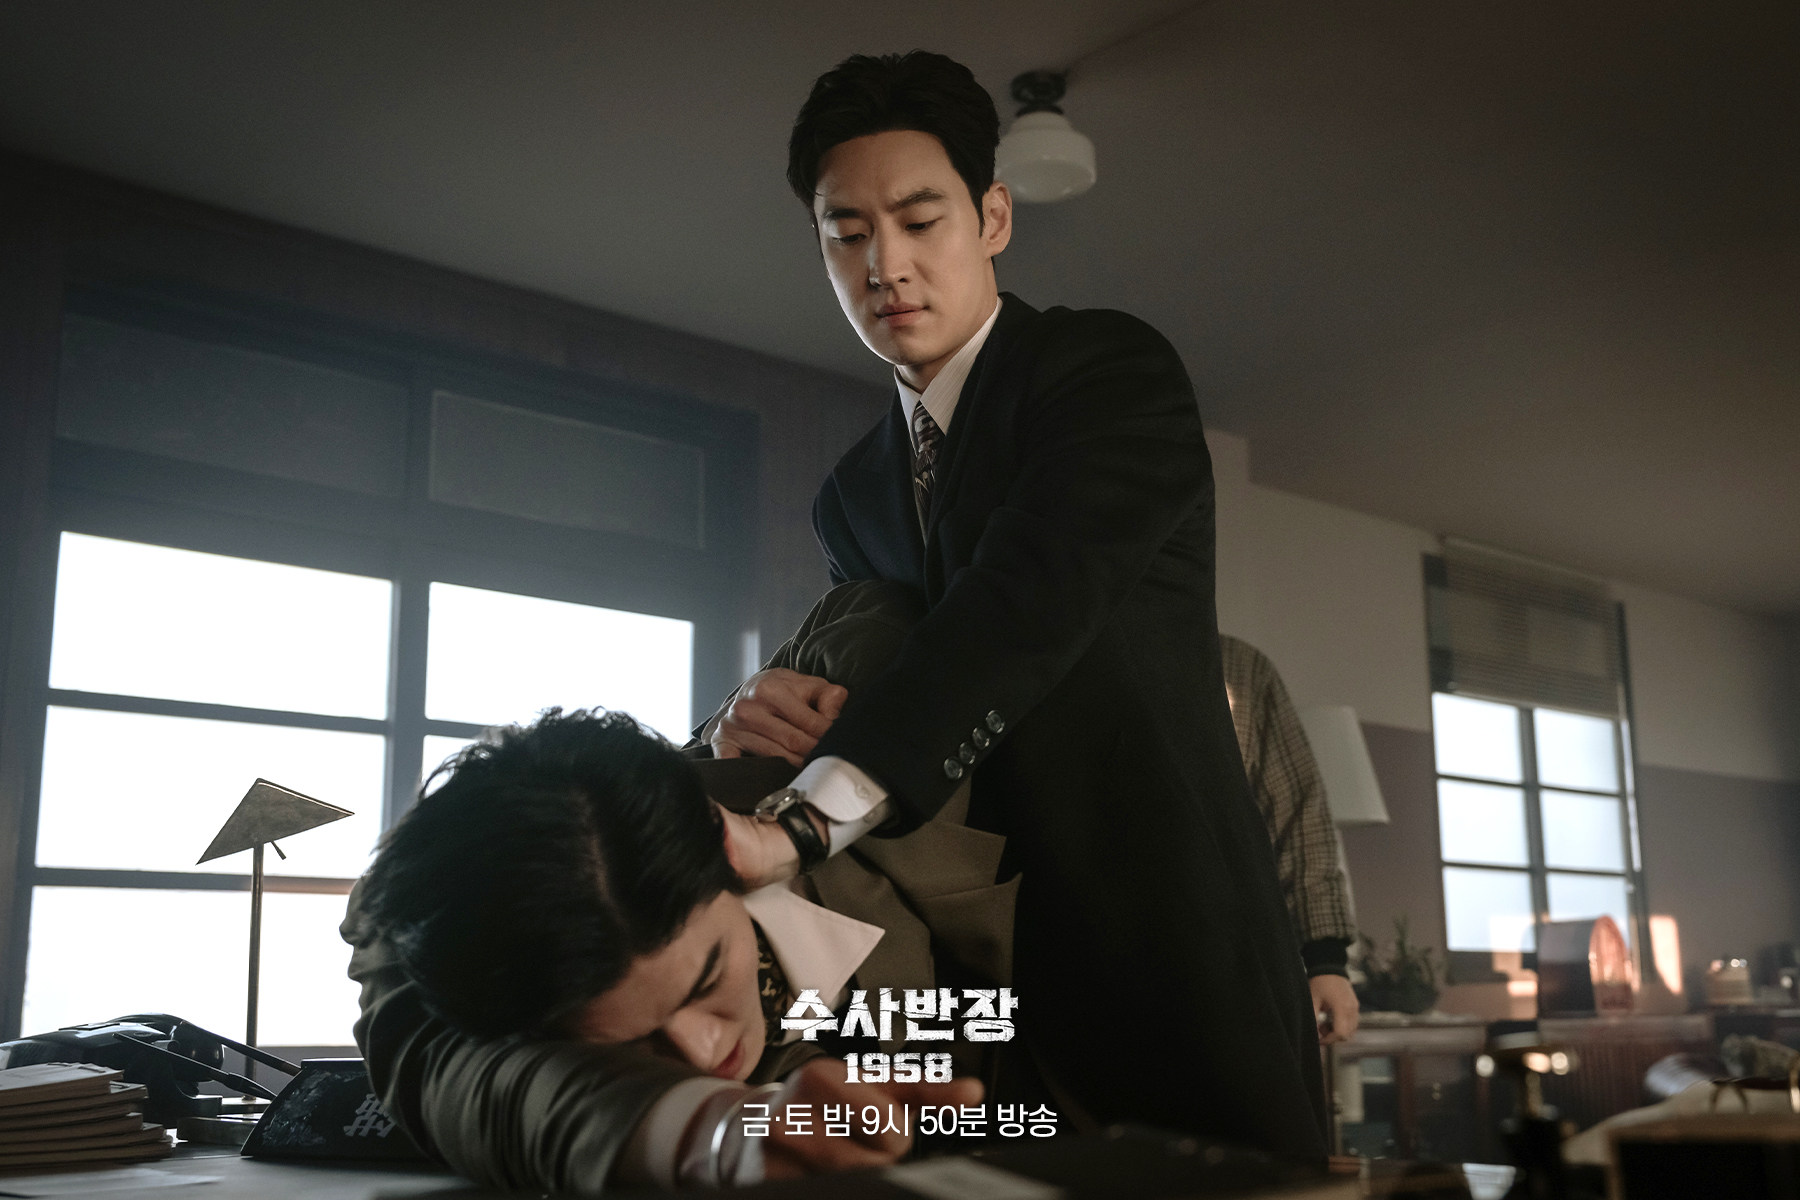 Disney+ K-drama Chief Detective 1958, a prequel to the long-running series Chief Inspector screened from 1971 to 1989 in South Korea, is set in the late 1950s, and stars Lee Je-hoon as Detective Park Yeong-han (above) and Seo Eun-soo as his sweetheart Lee Hye-ju.